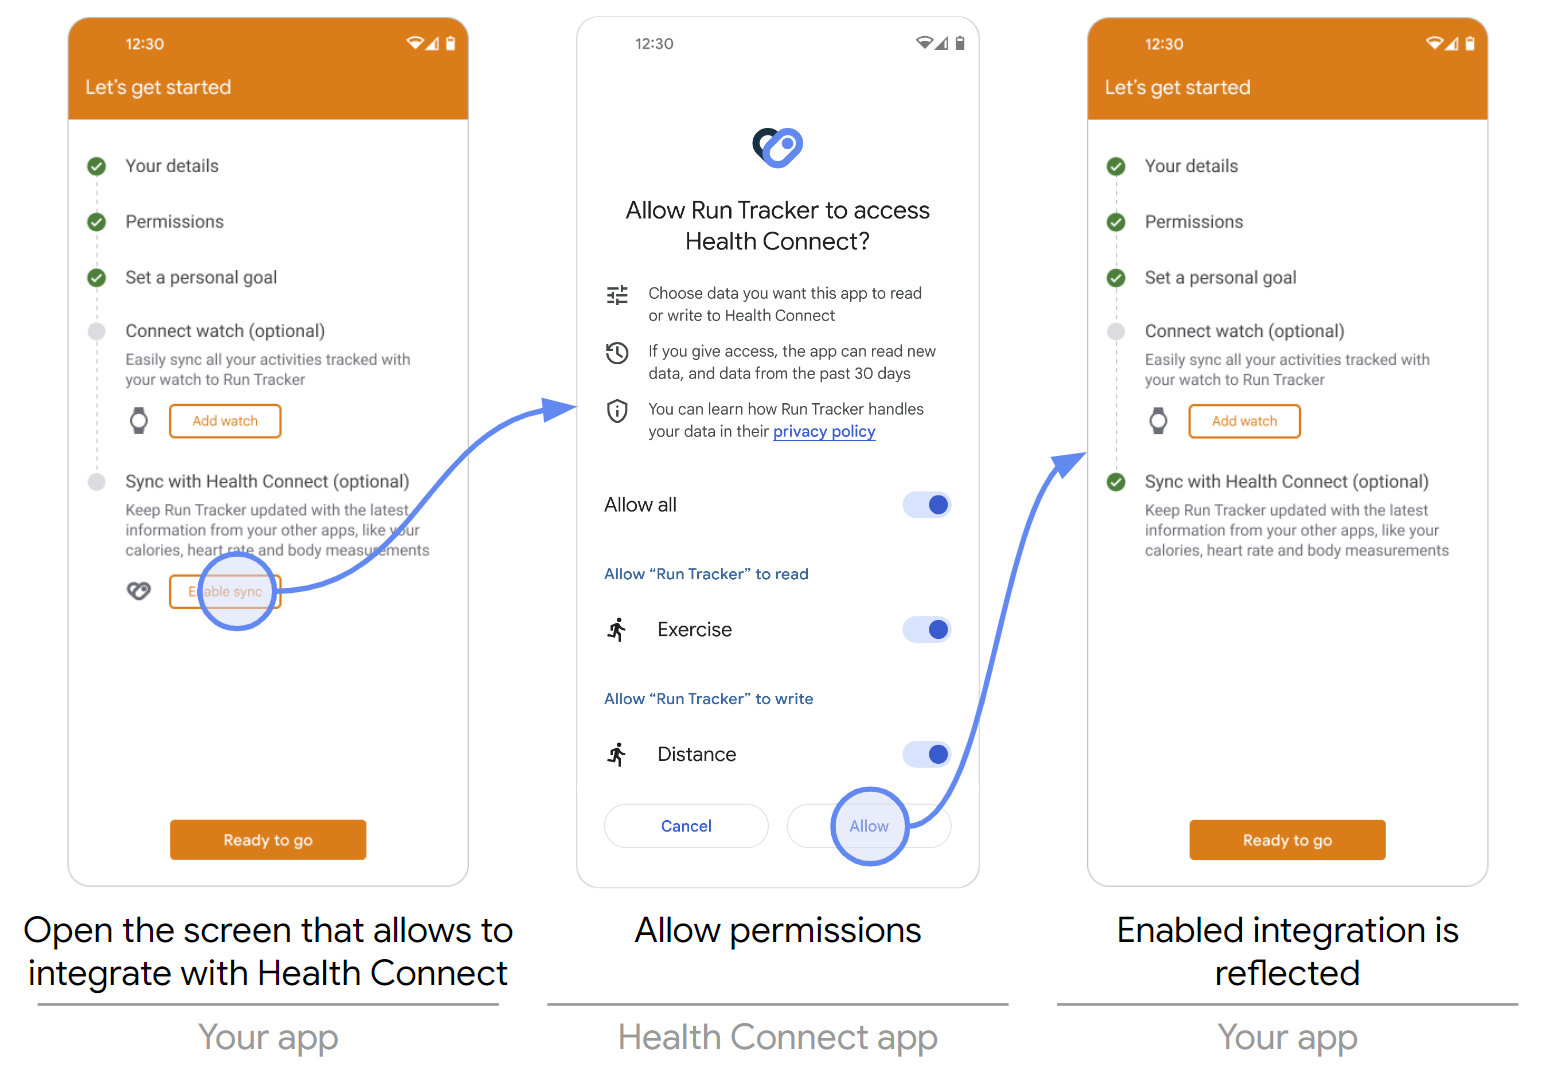 Attempt to integrate with Health Connect while uninstalled